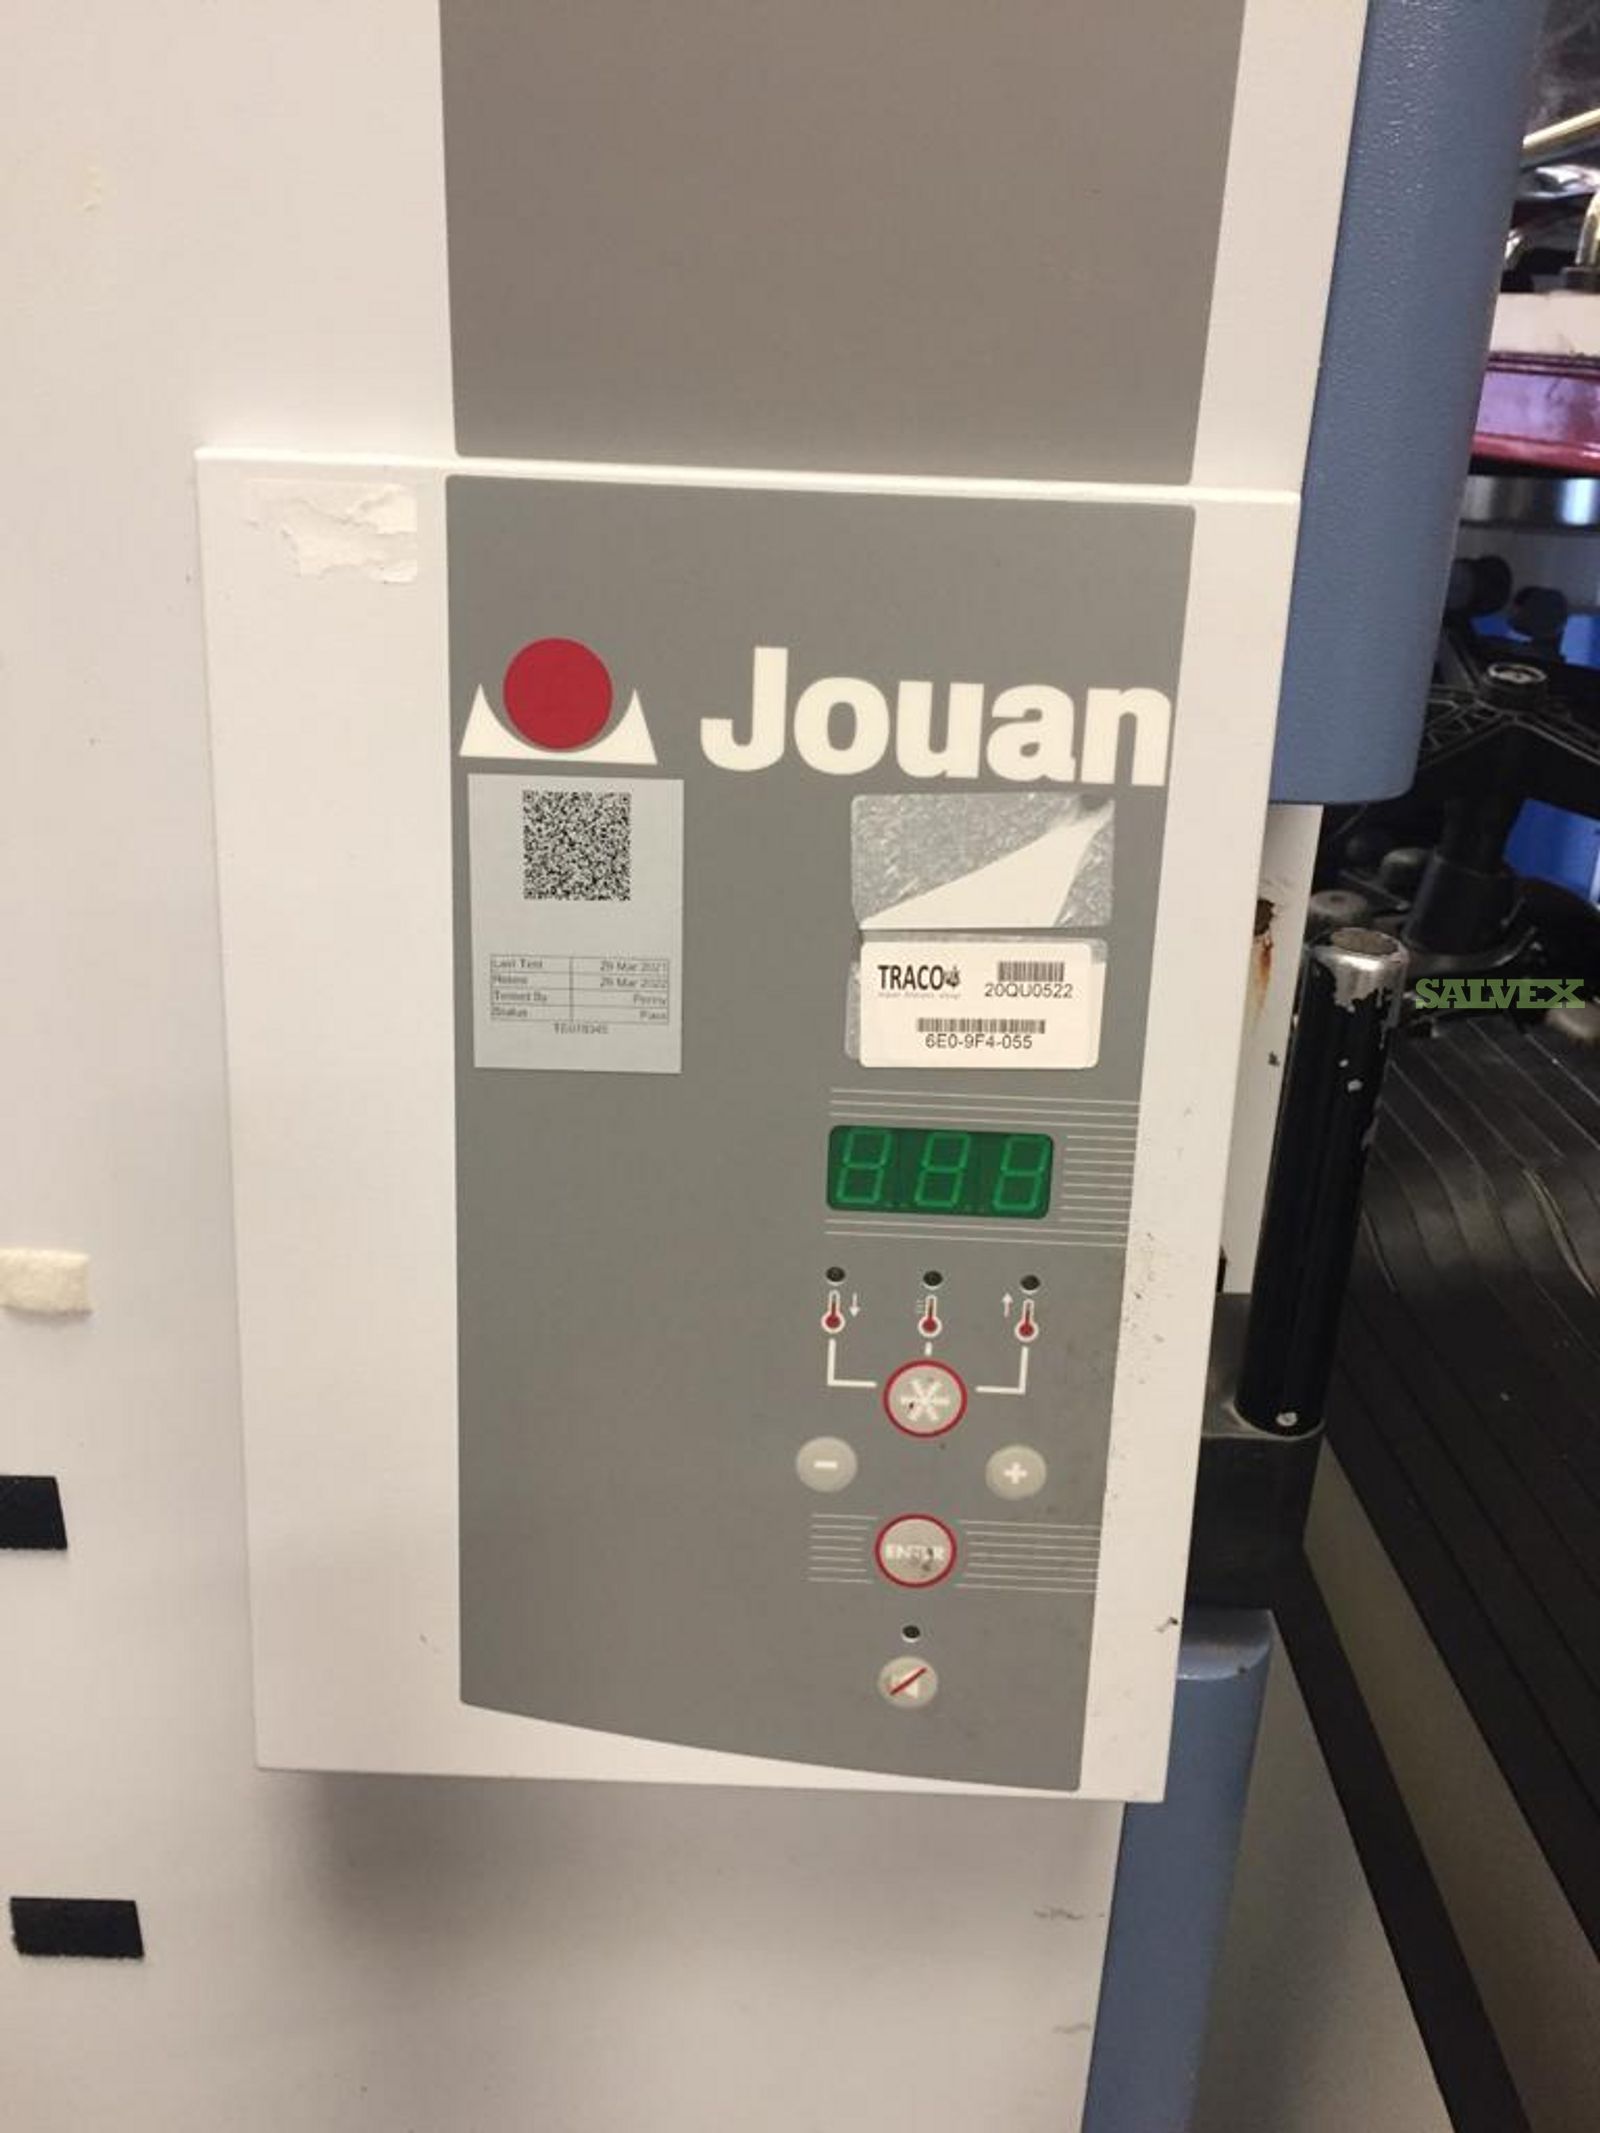 Jouan Incubator Integrated Cooling System with Microprocessor Control (1 Unit)